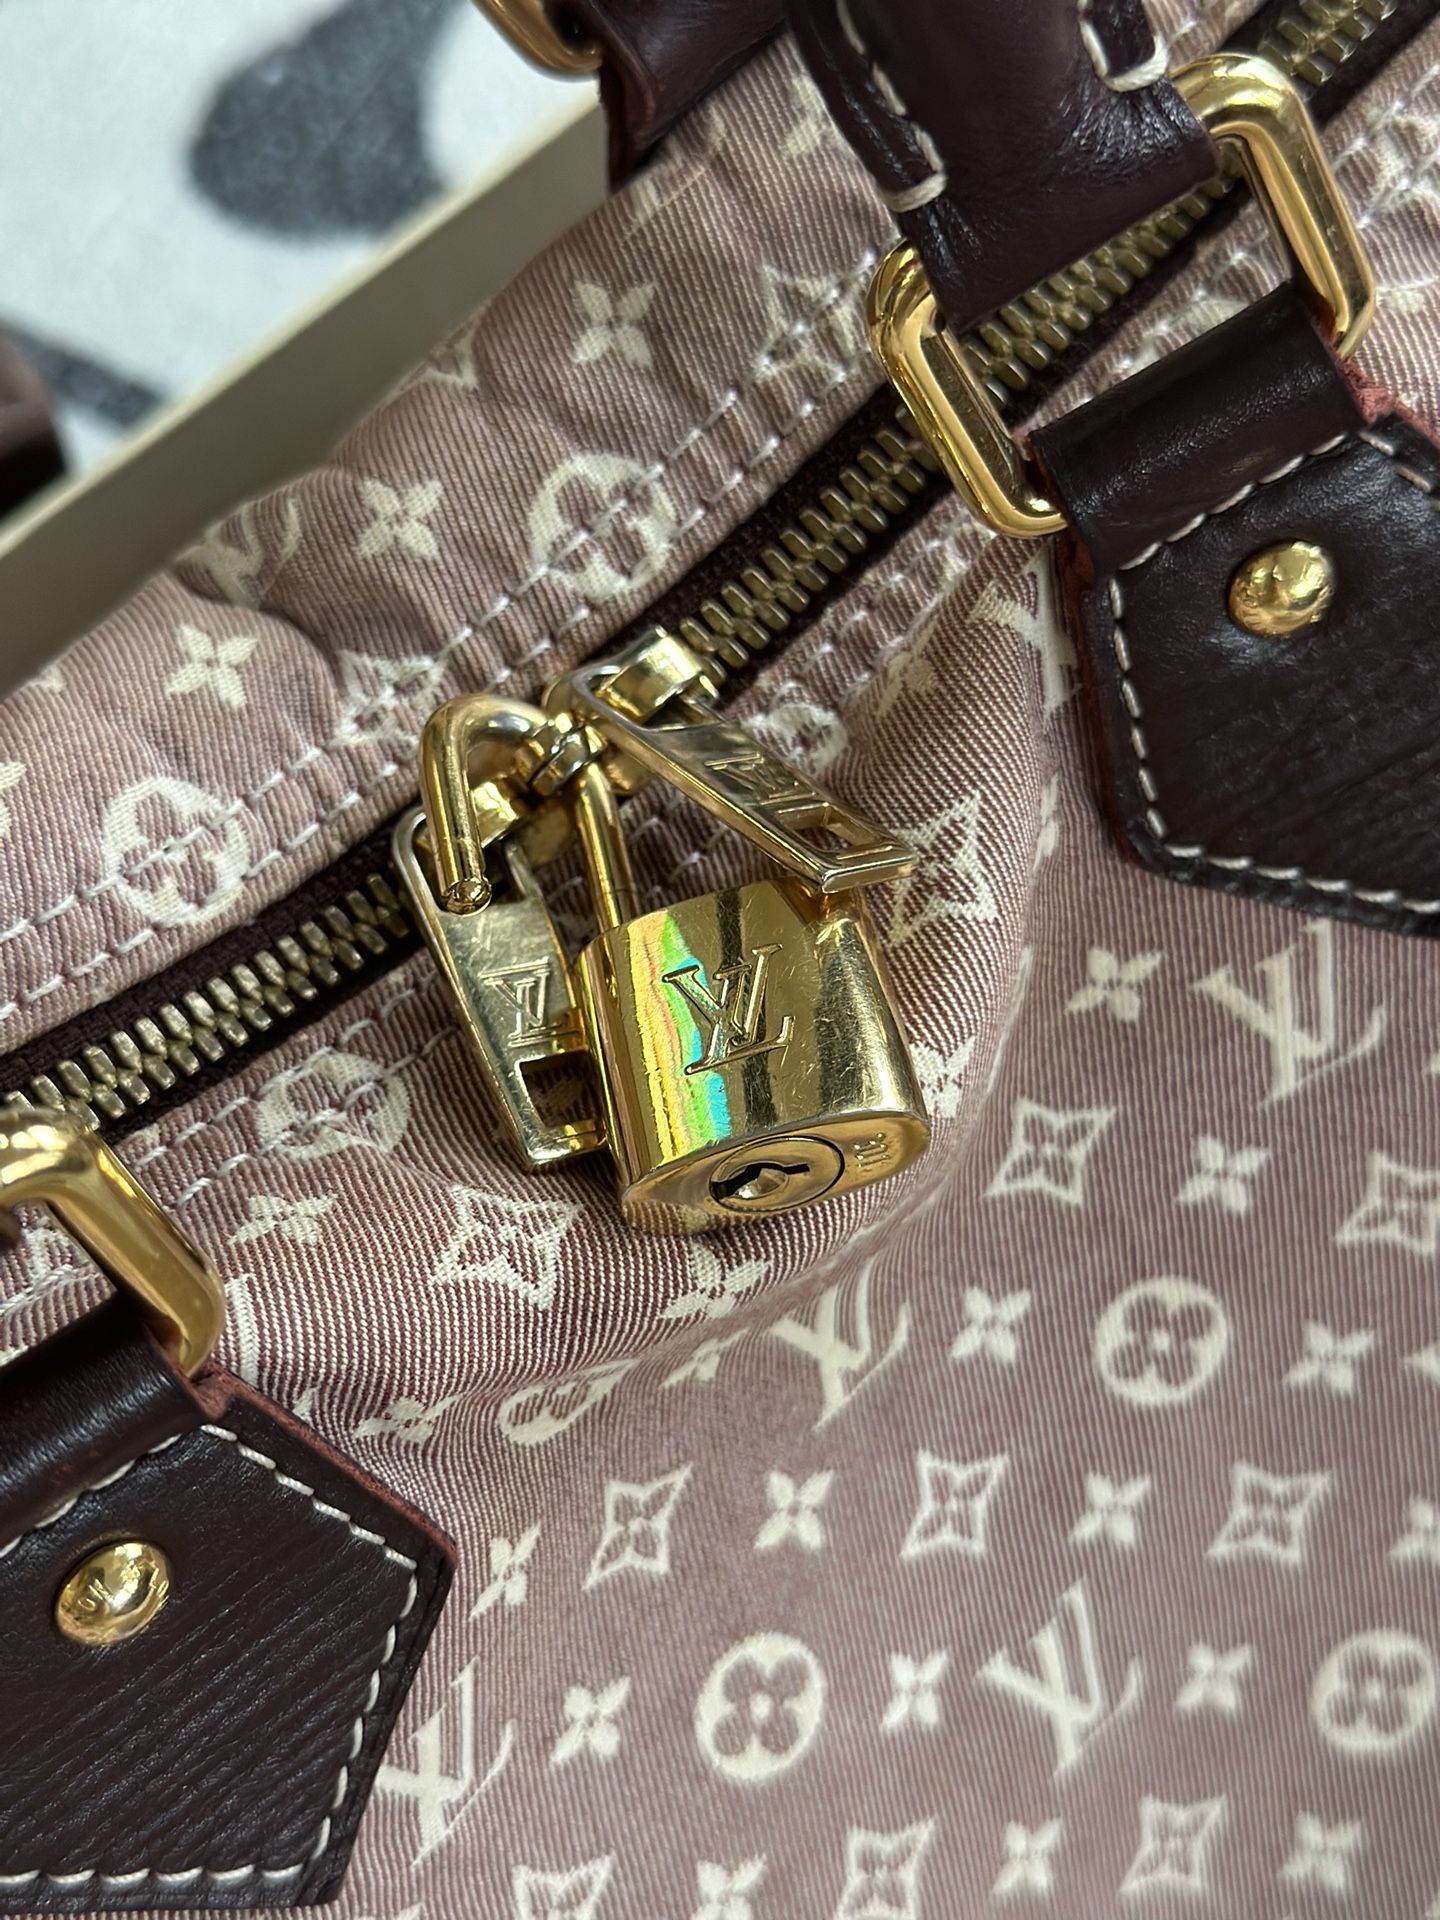 AUTHENTIC Preloved Louis Vuitton Monogram Idylle Speedy Bandouliere 30  Sepia for Sale in Snoqualmie Pass, WA - OfferUp